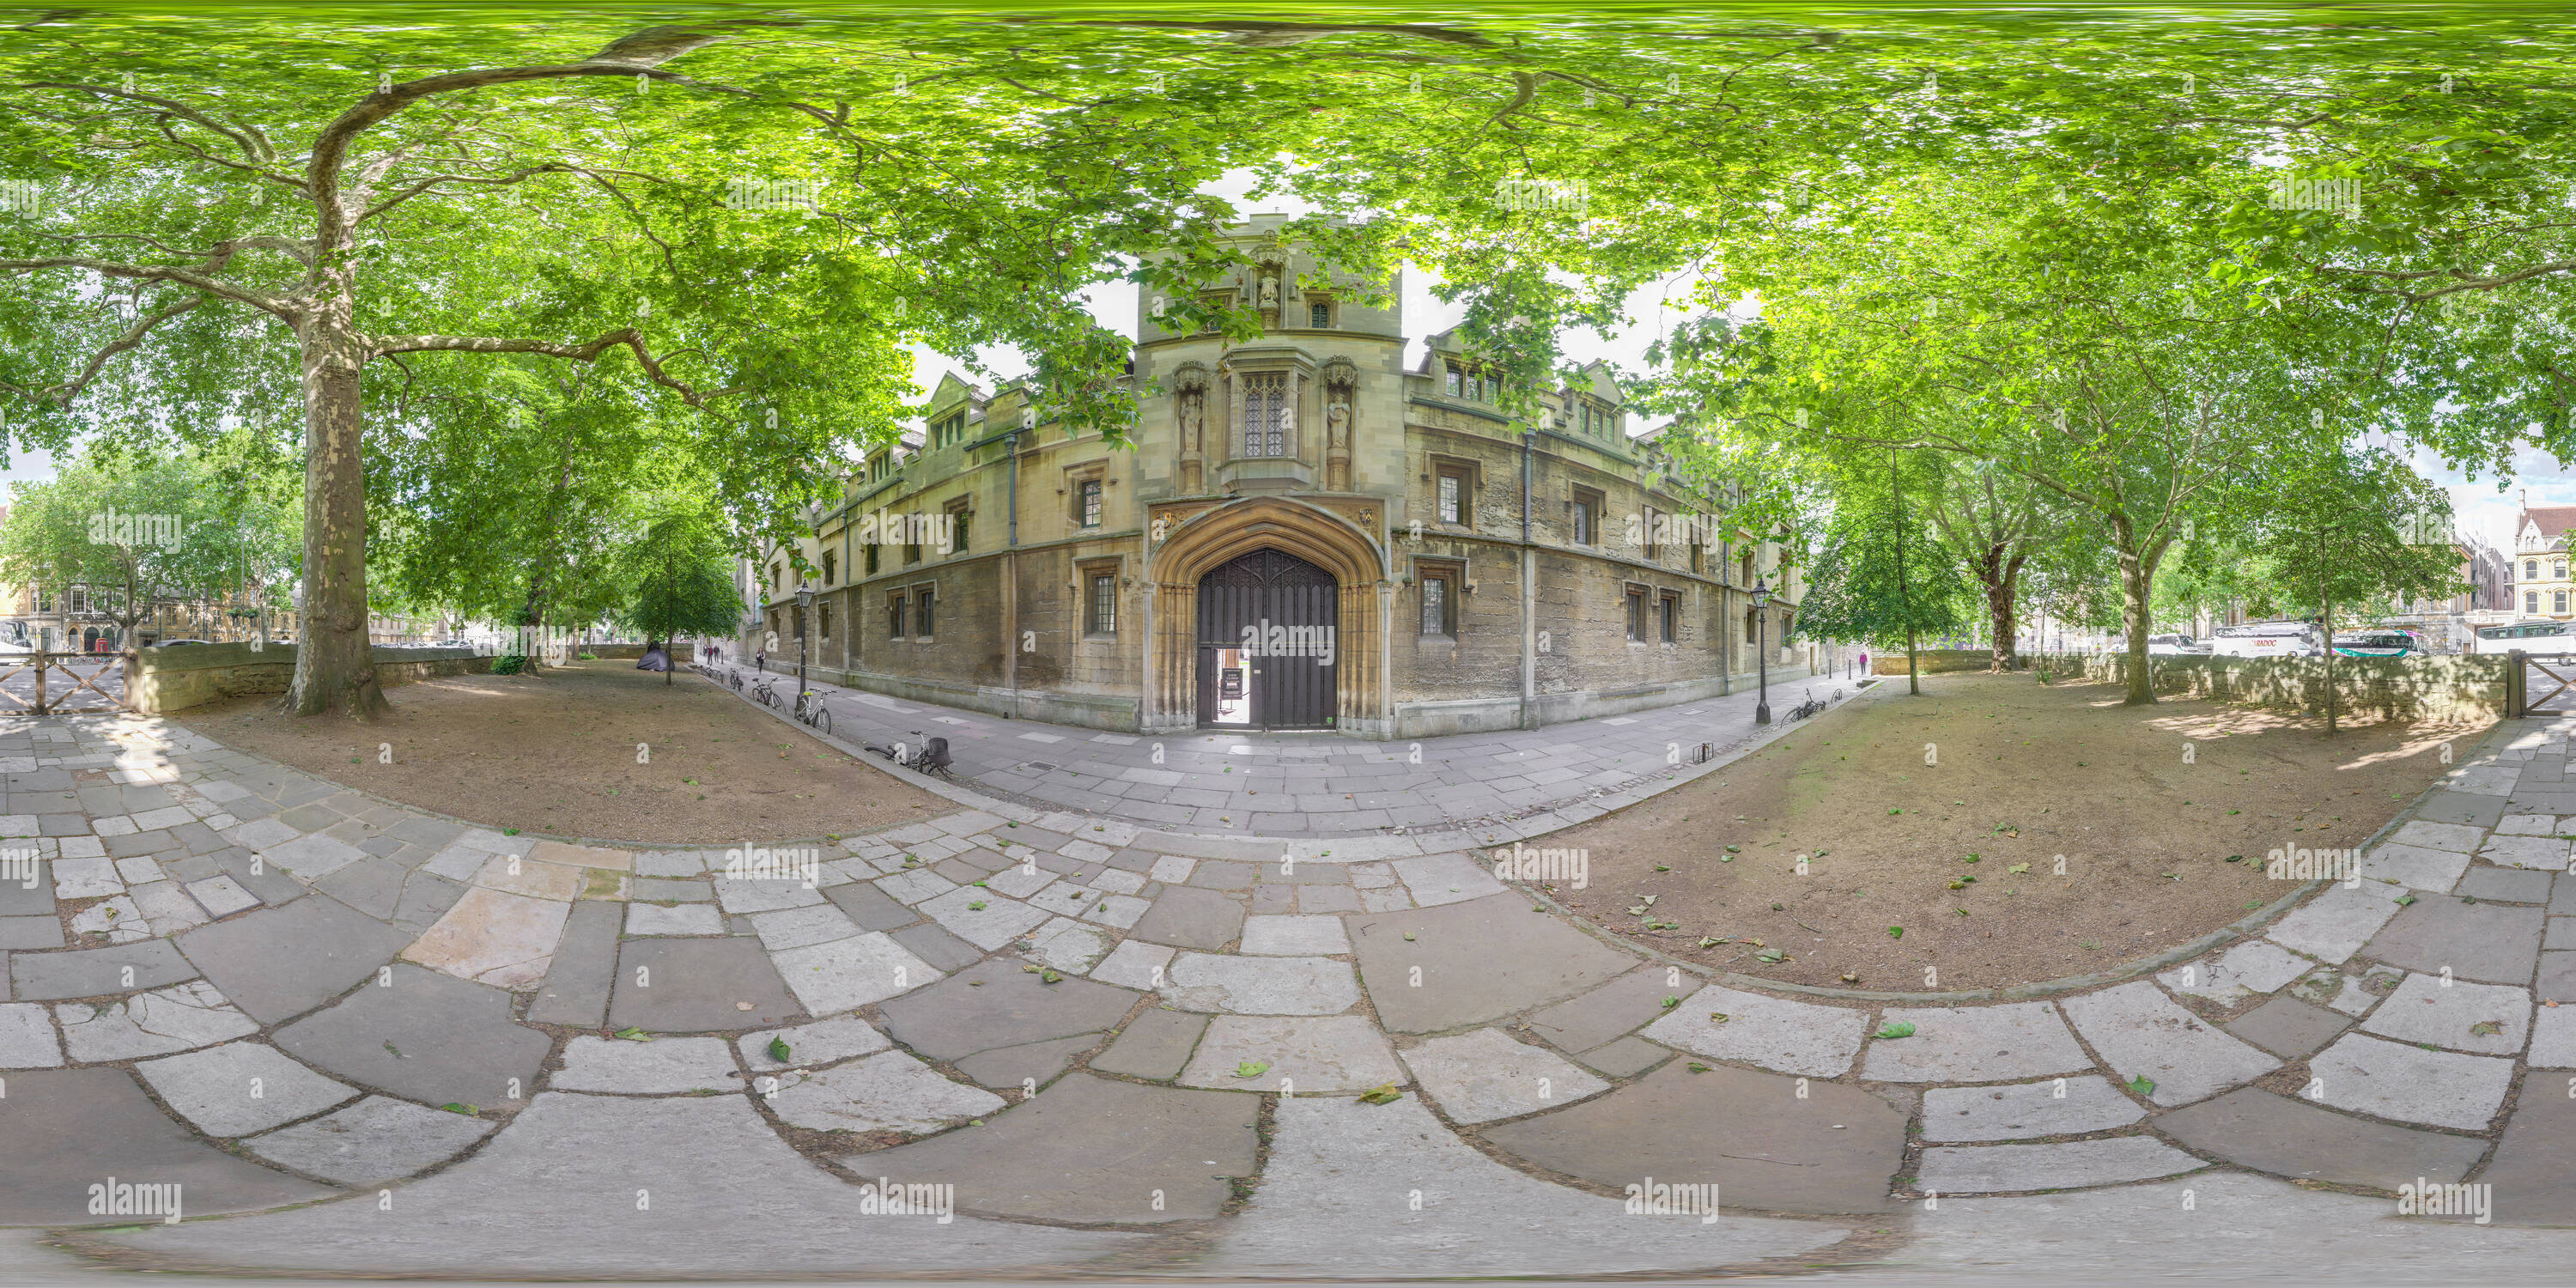 360-view-of-entrance-and-exterior-facade-of-st-john-s-college-oxford